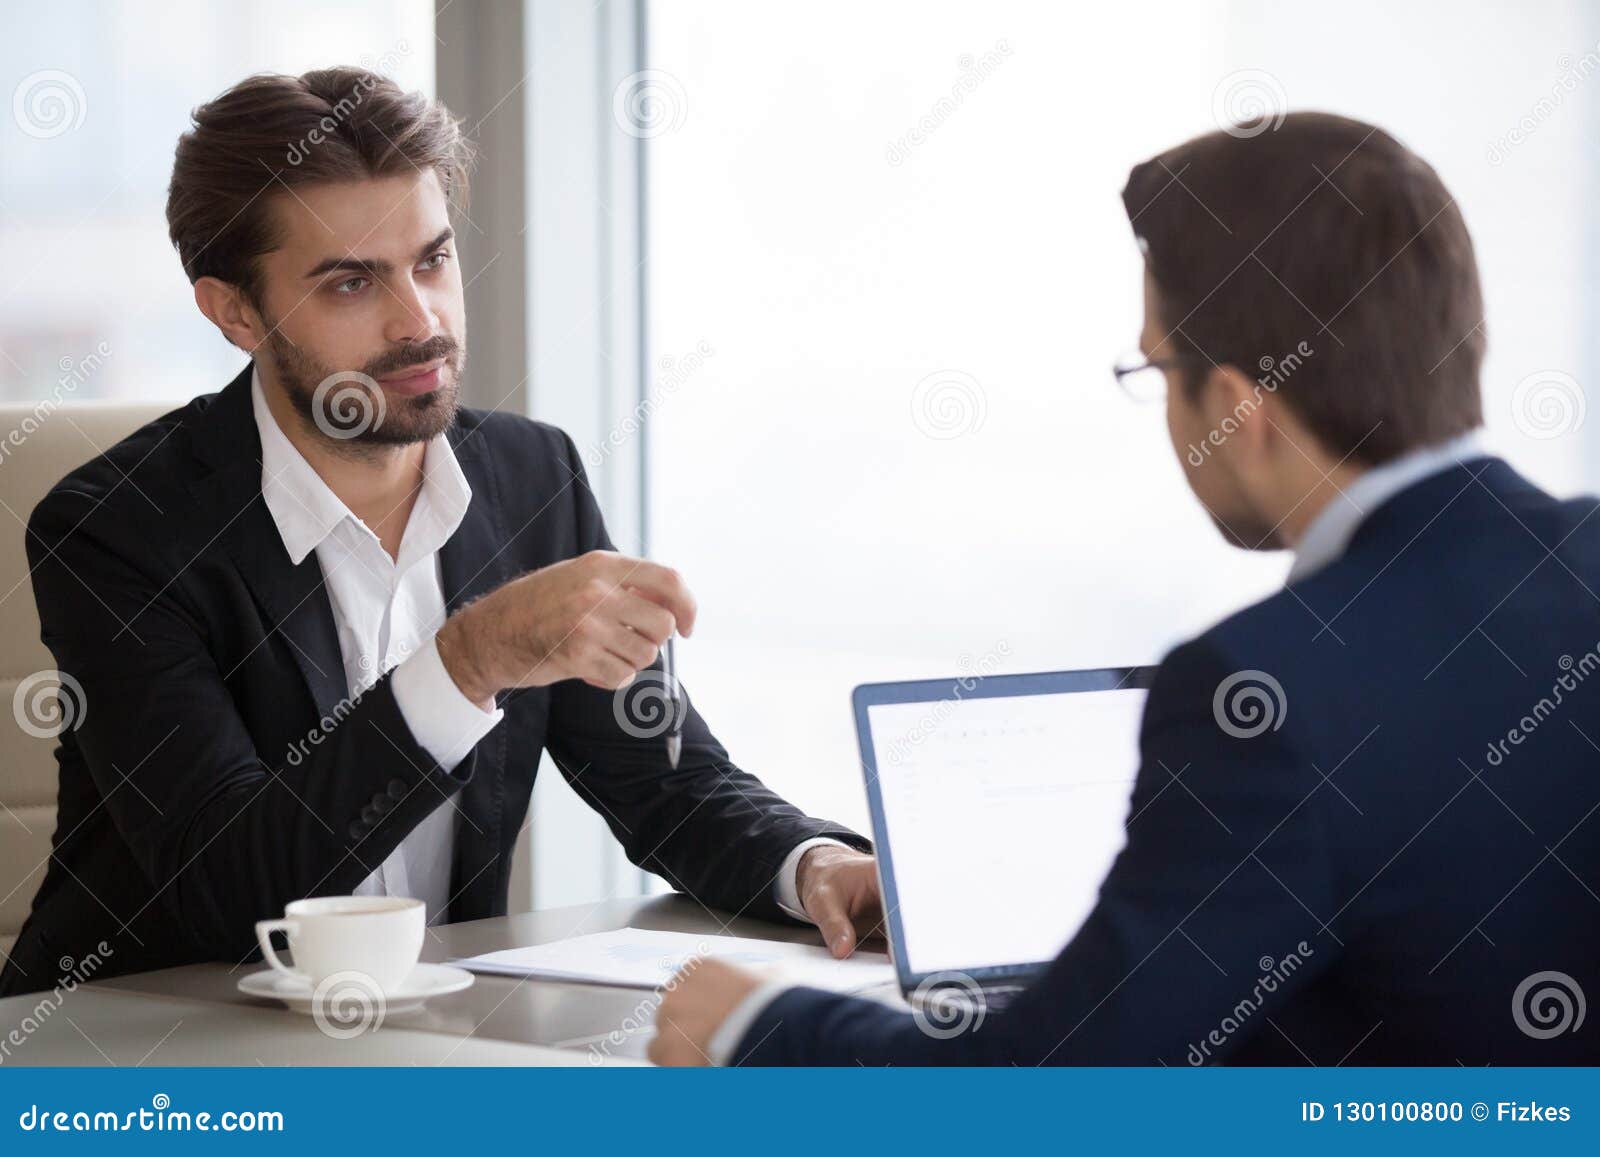 Two Men in Suits are Talking in the Office Stock Photo - Image of office,  colleague: 130100800